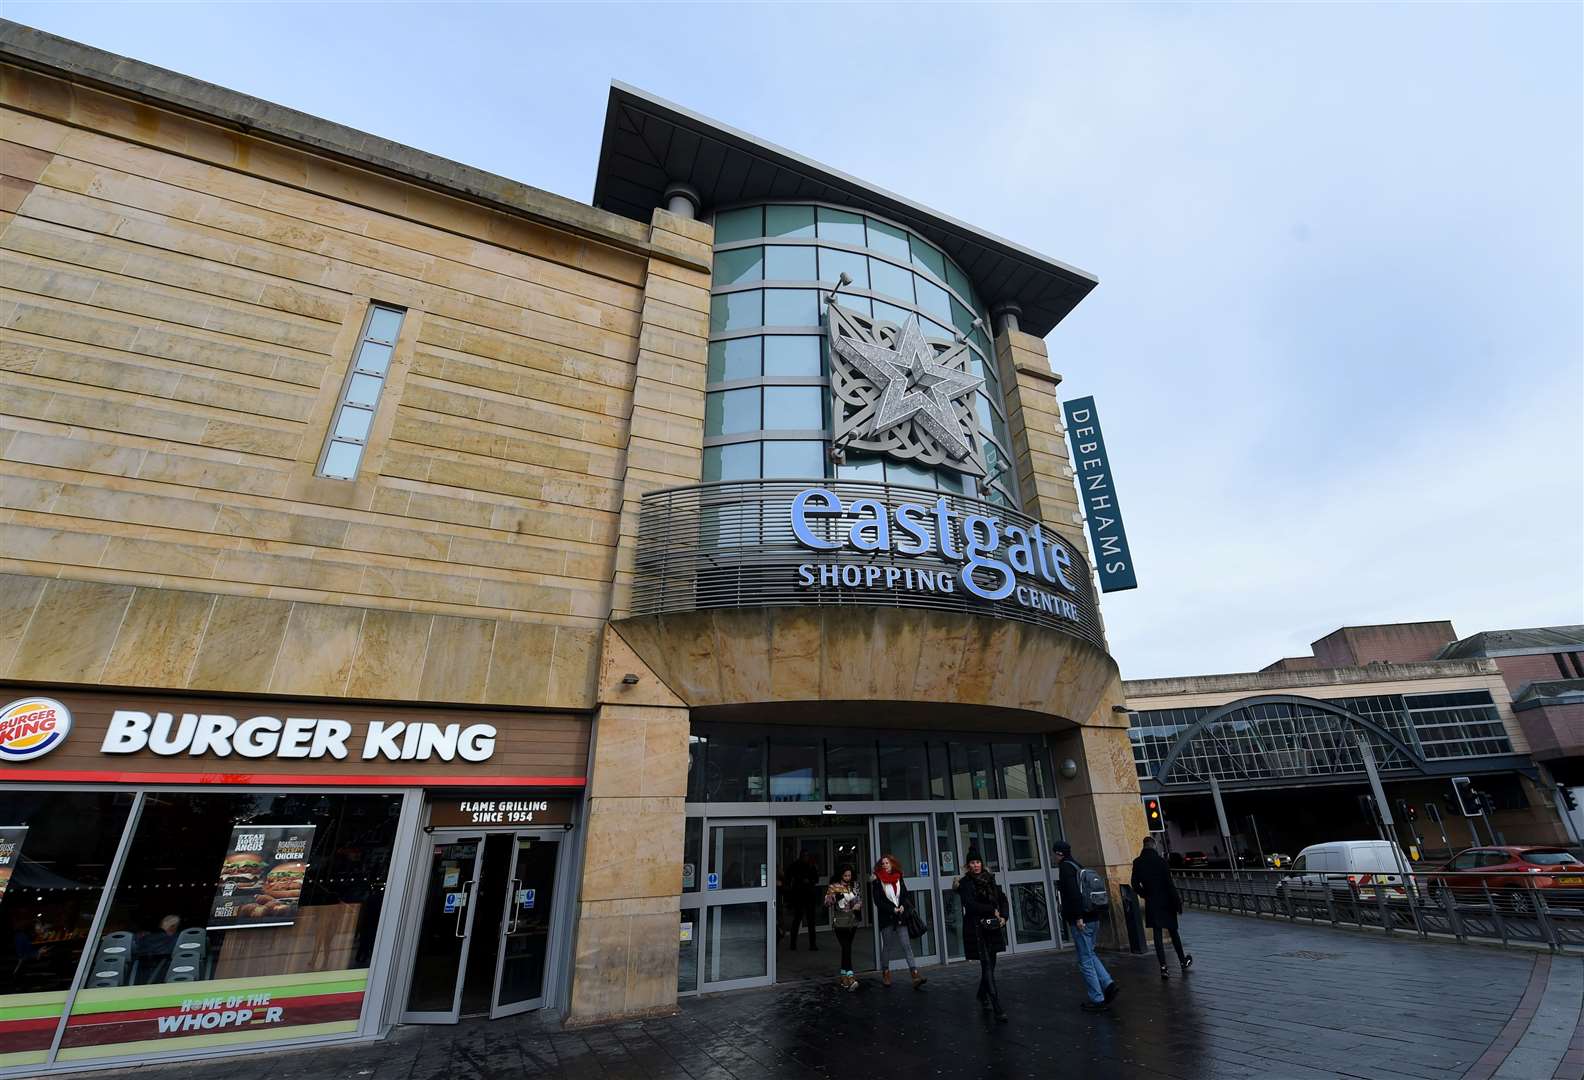 Free parking will be available at the Eastgate Shopping Centre for key workers.